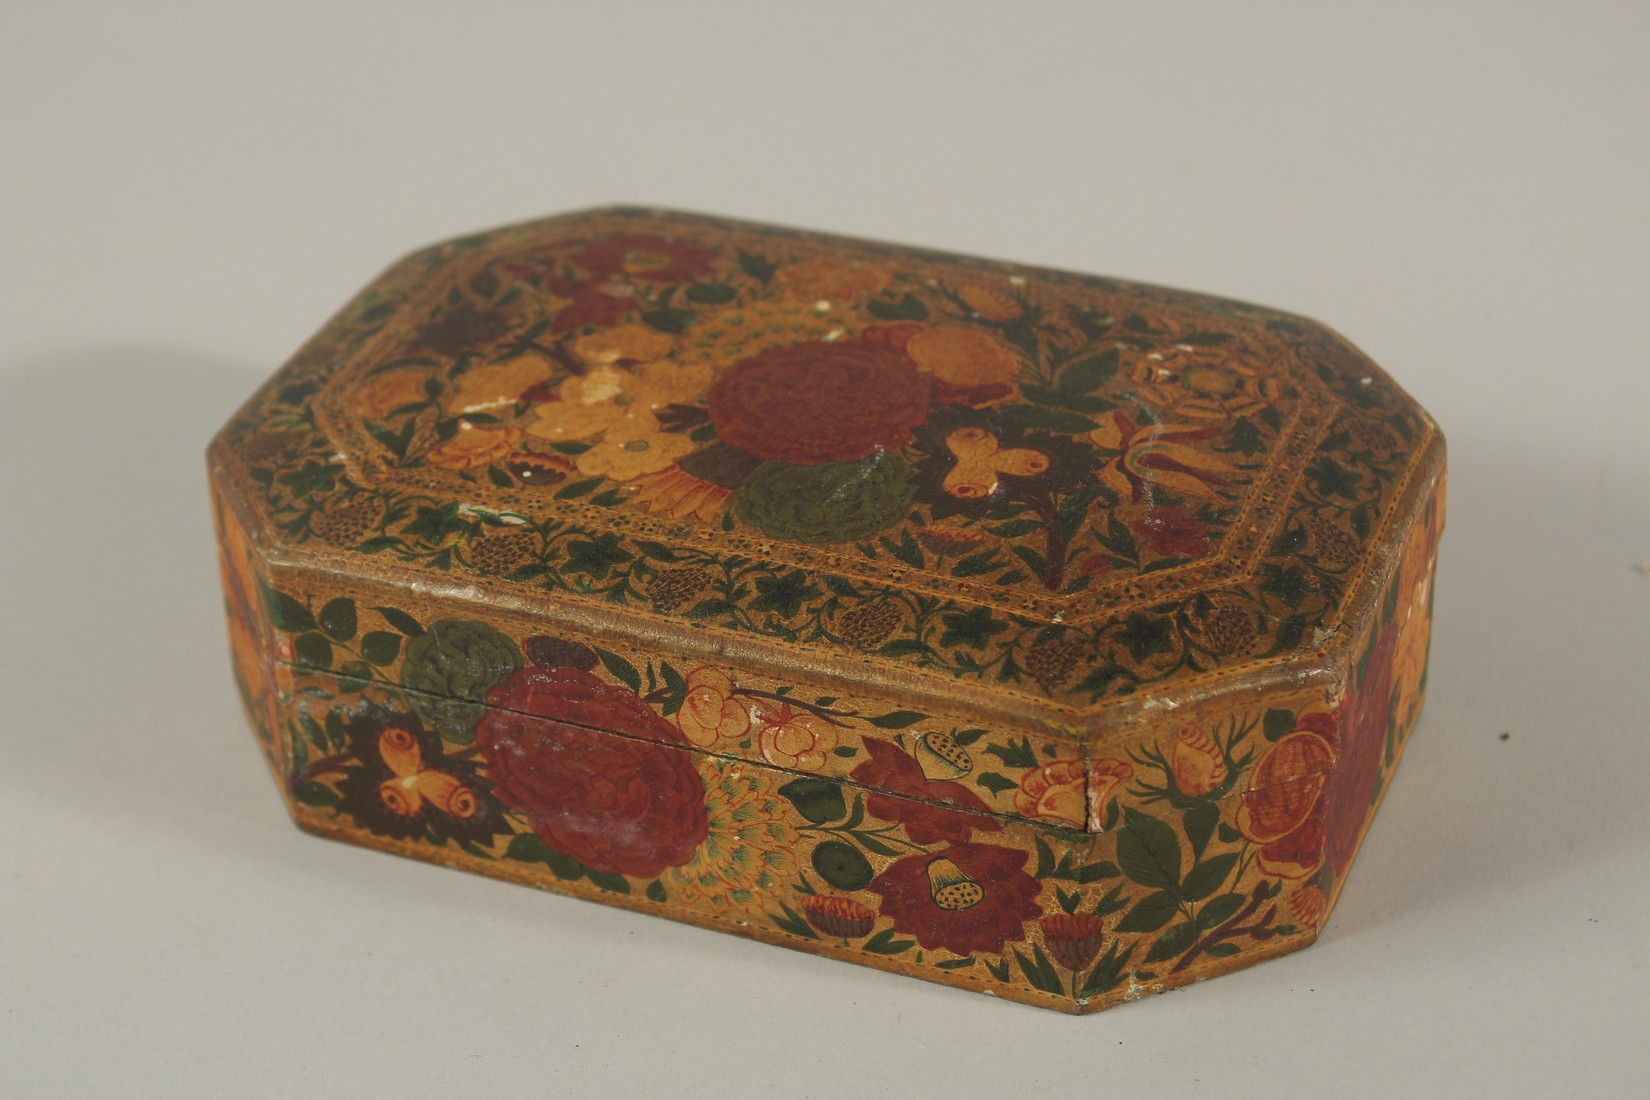 A 19TH CENTURY INDIAN KASHMIRI GILDED AND LACQUERED PAPIER MACHE BOX, SIGNED BY SUFFERING MOSES,